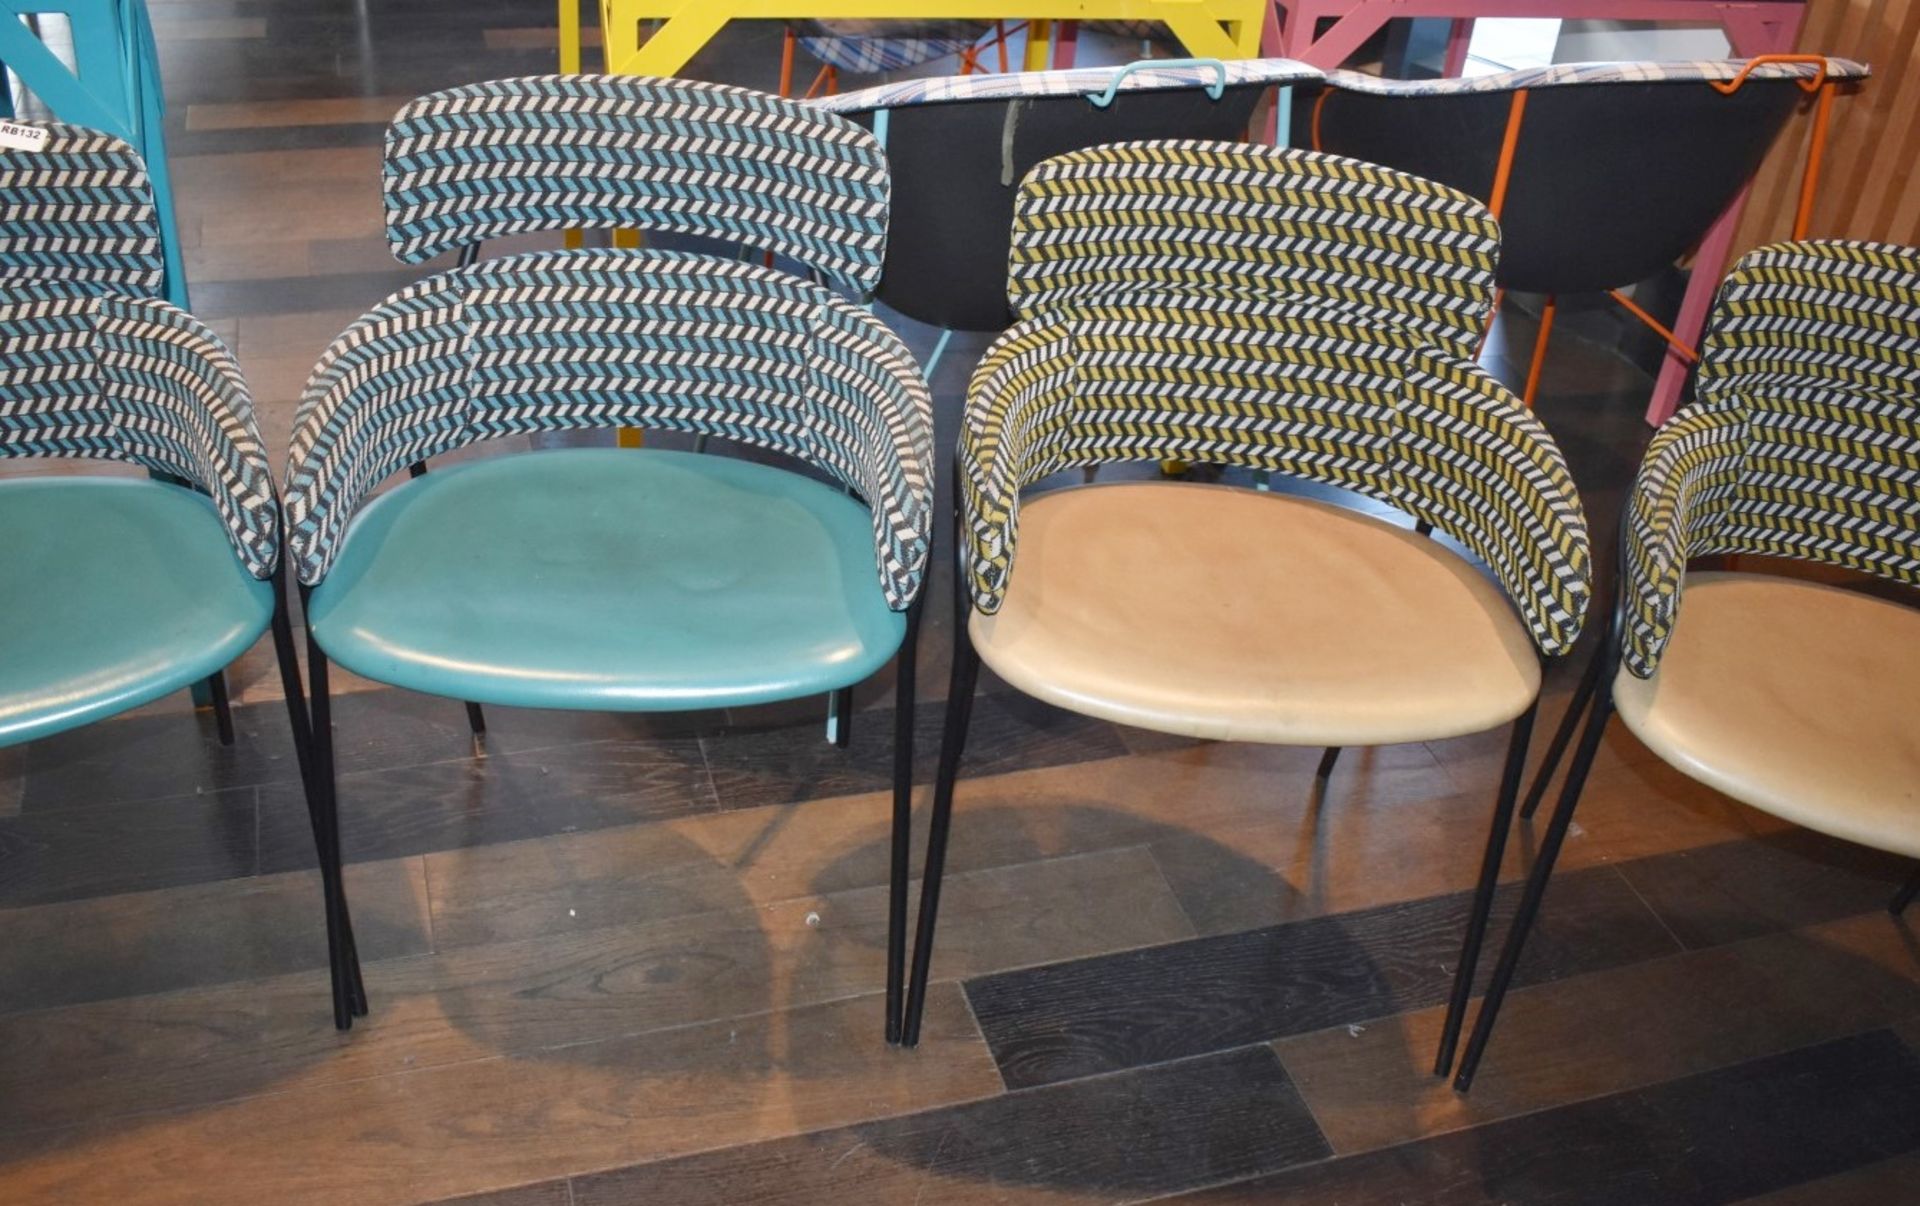 6 x Designer Debi Strike Dining Chairs - Made in Italy - RRP £2,400 - Ref: RB132 - CL558 - Location: